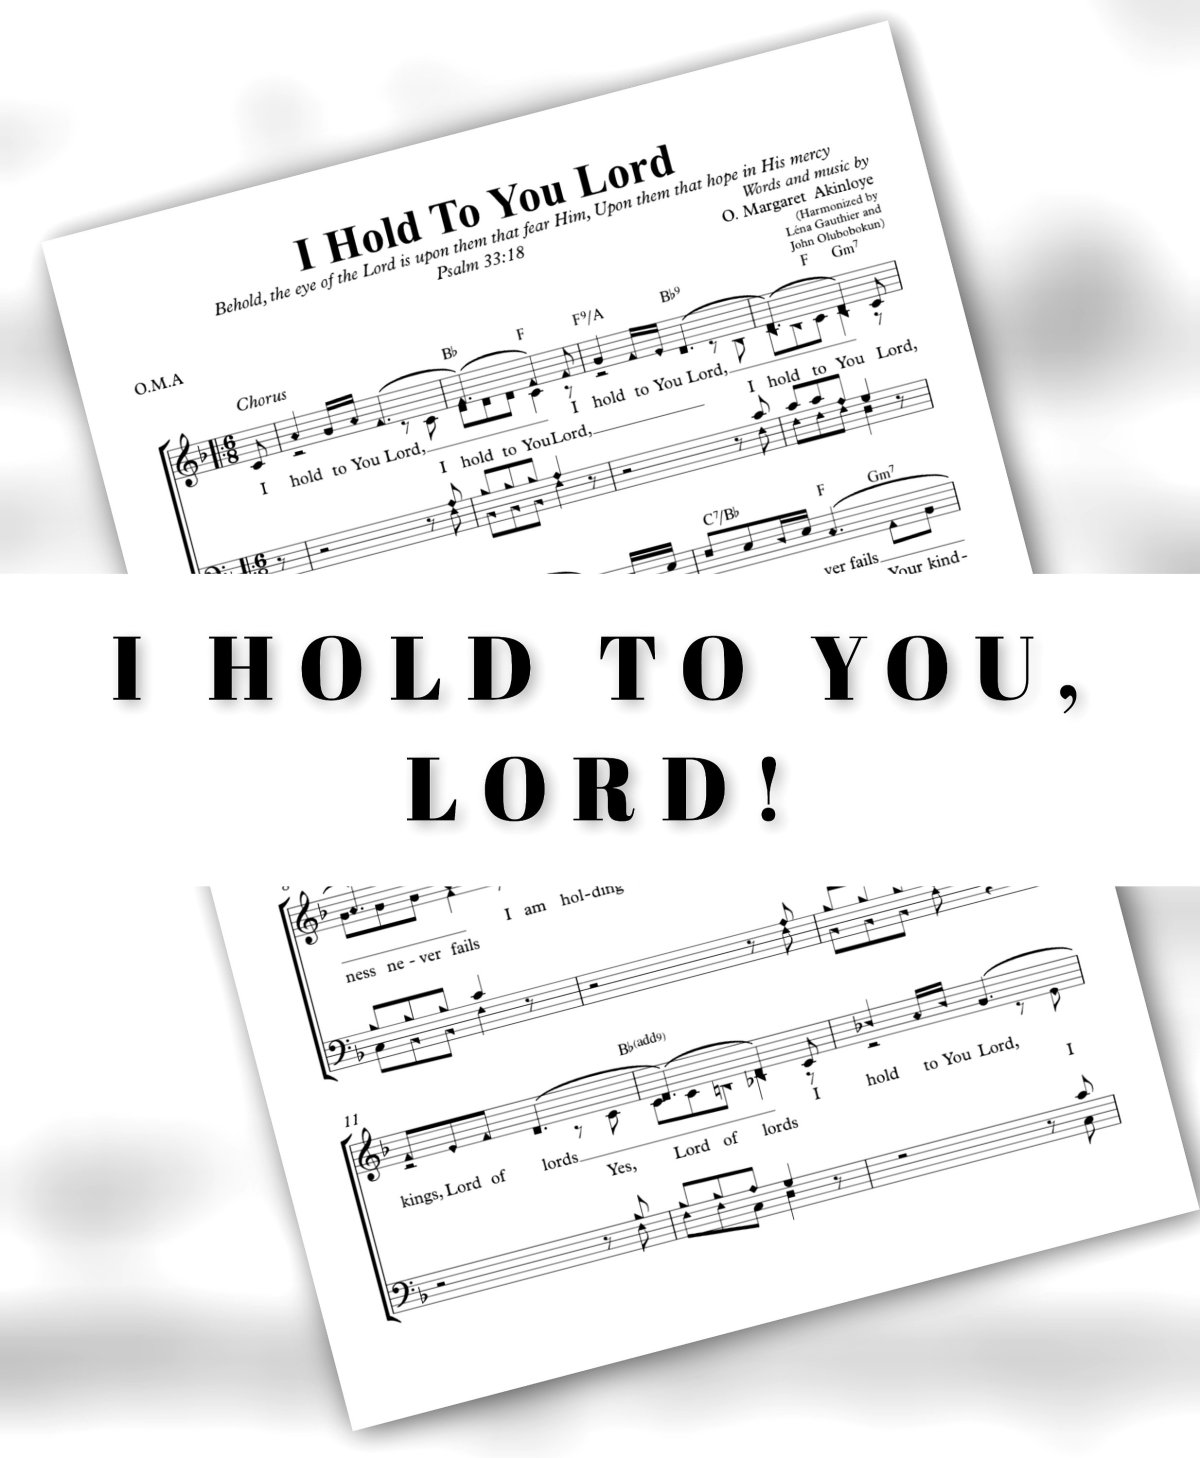 “I Hold To You, Lord”